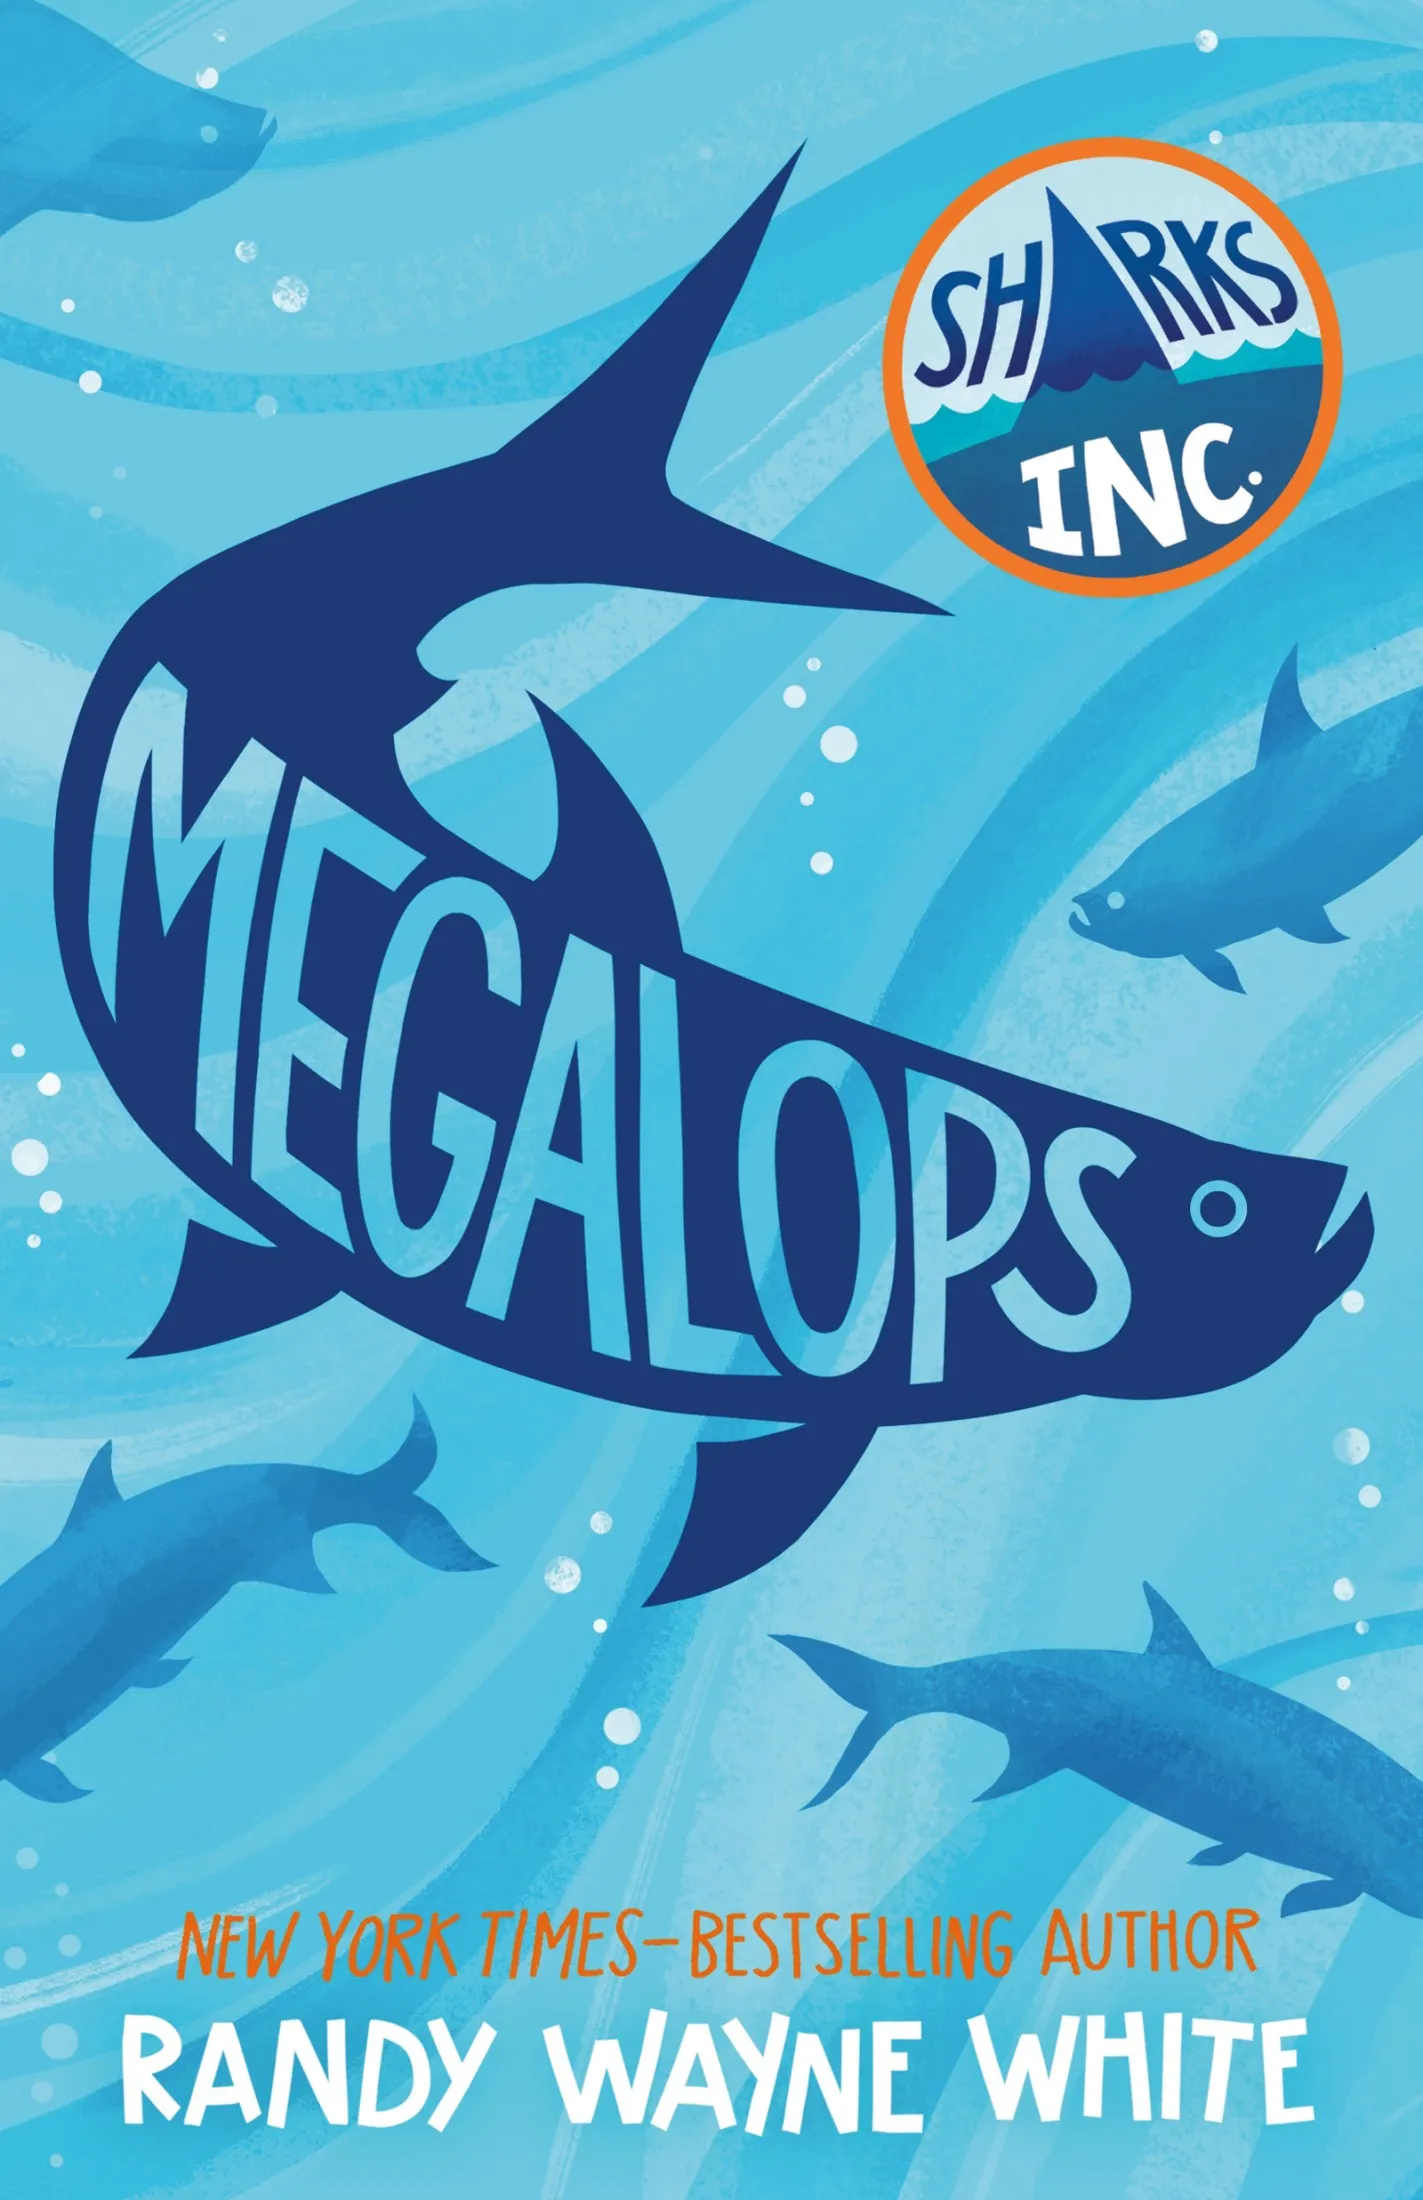 Megalops (Sharks Incorporated #4)